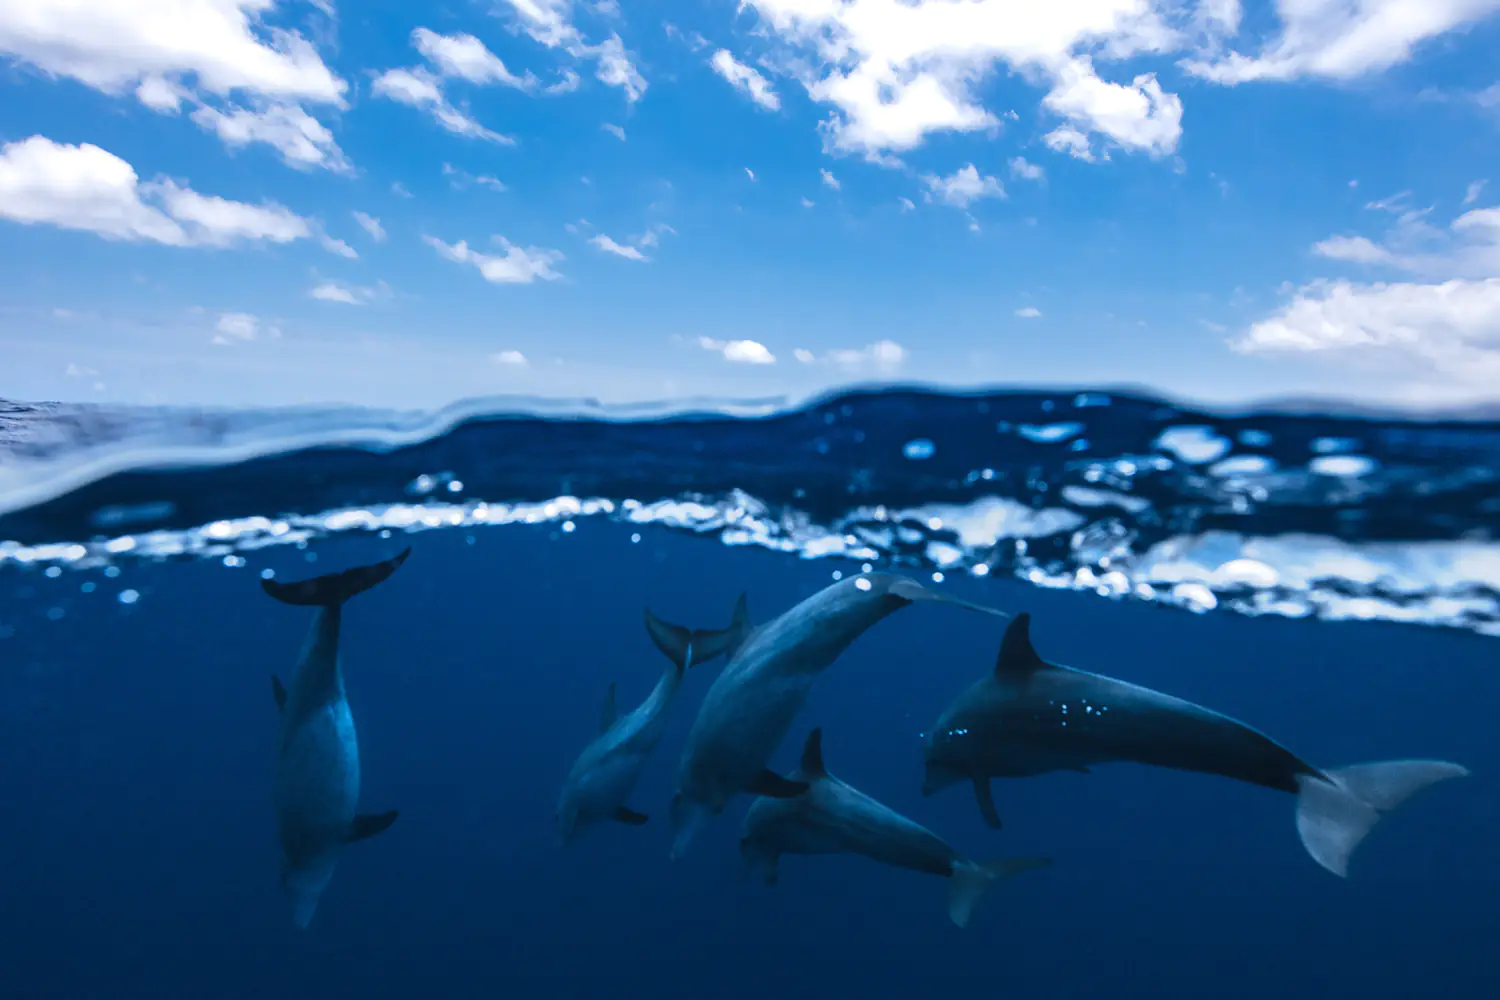 Wall Mural Photo Wallpaper Between Air And Water With The Dolphins